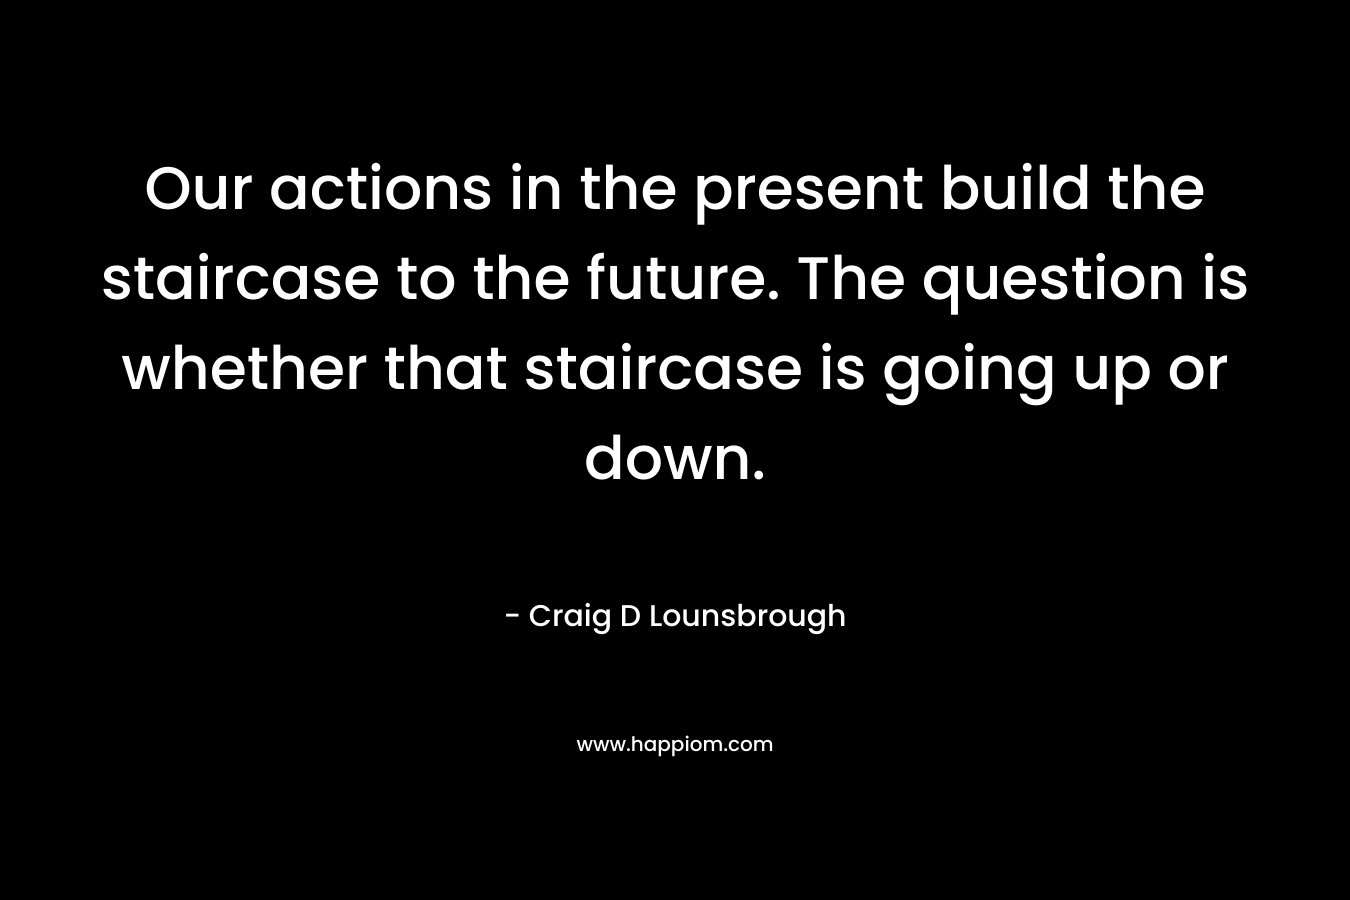 Our actions in the present build the staircase to the future. The question is whether that staircase is going up or down.